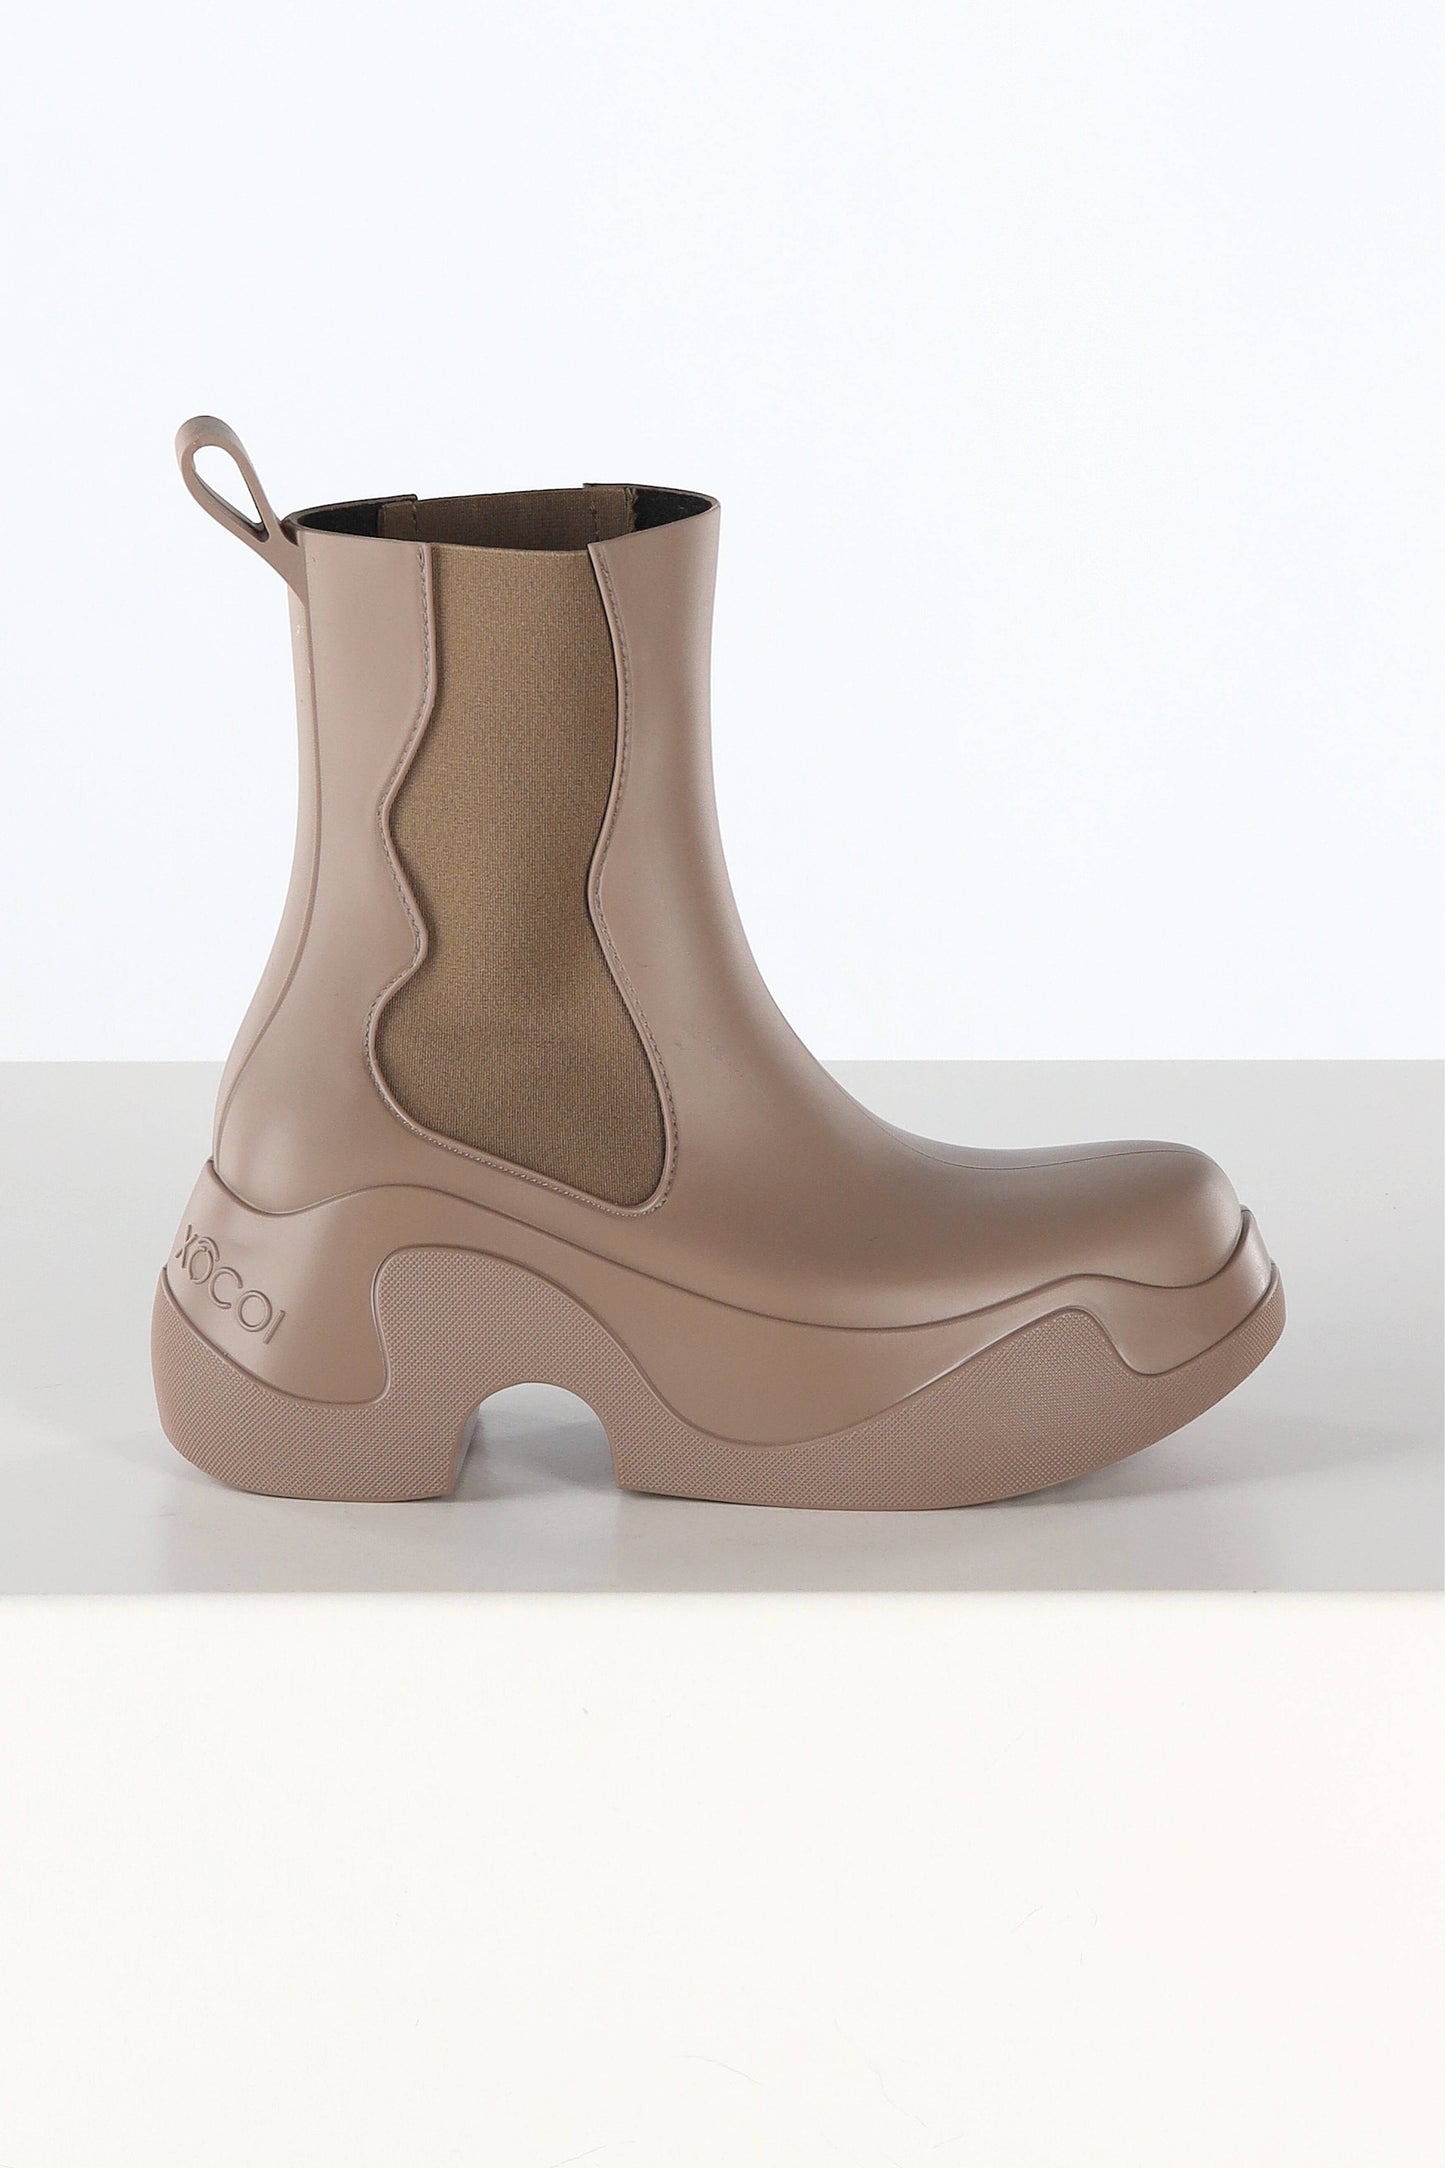 Boots PVC Recyclable in TortoraXocoi - Anita Hass